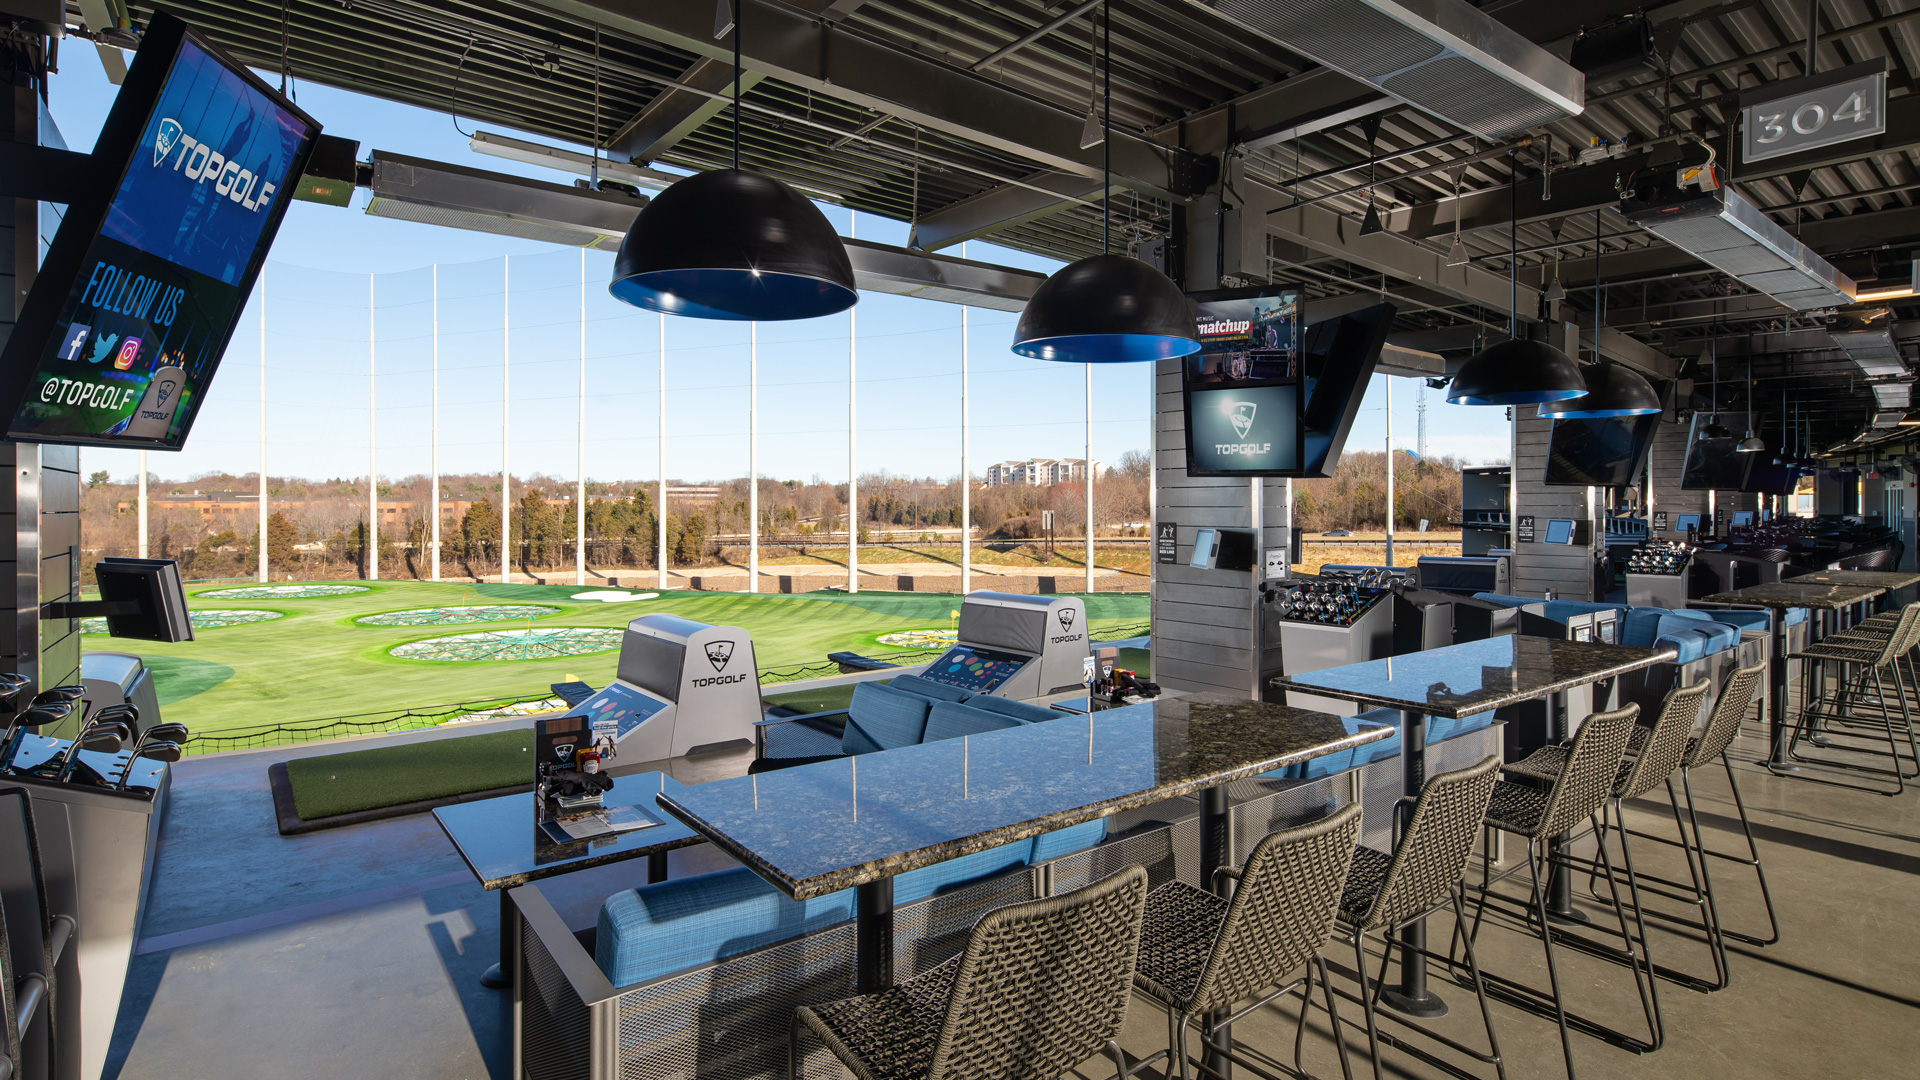 does topgolf have wifi?